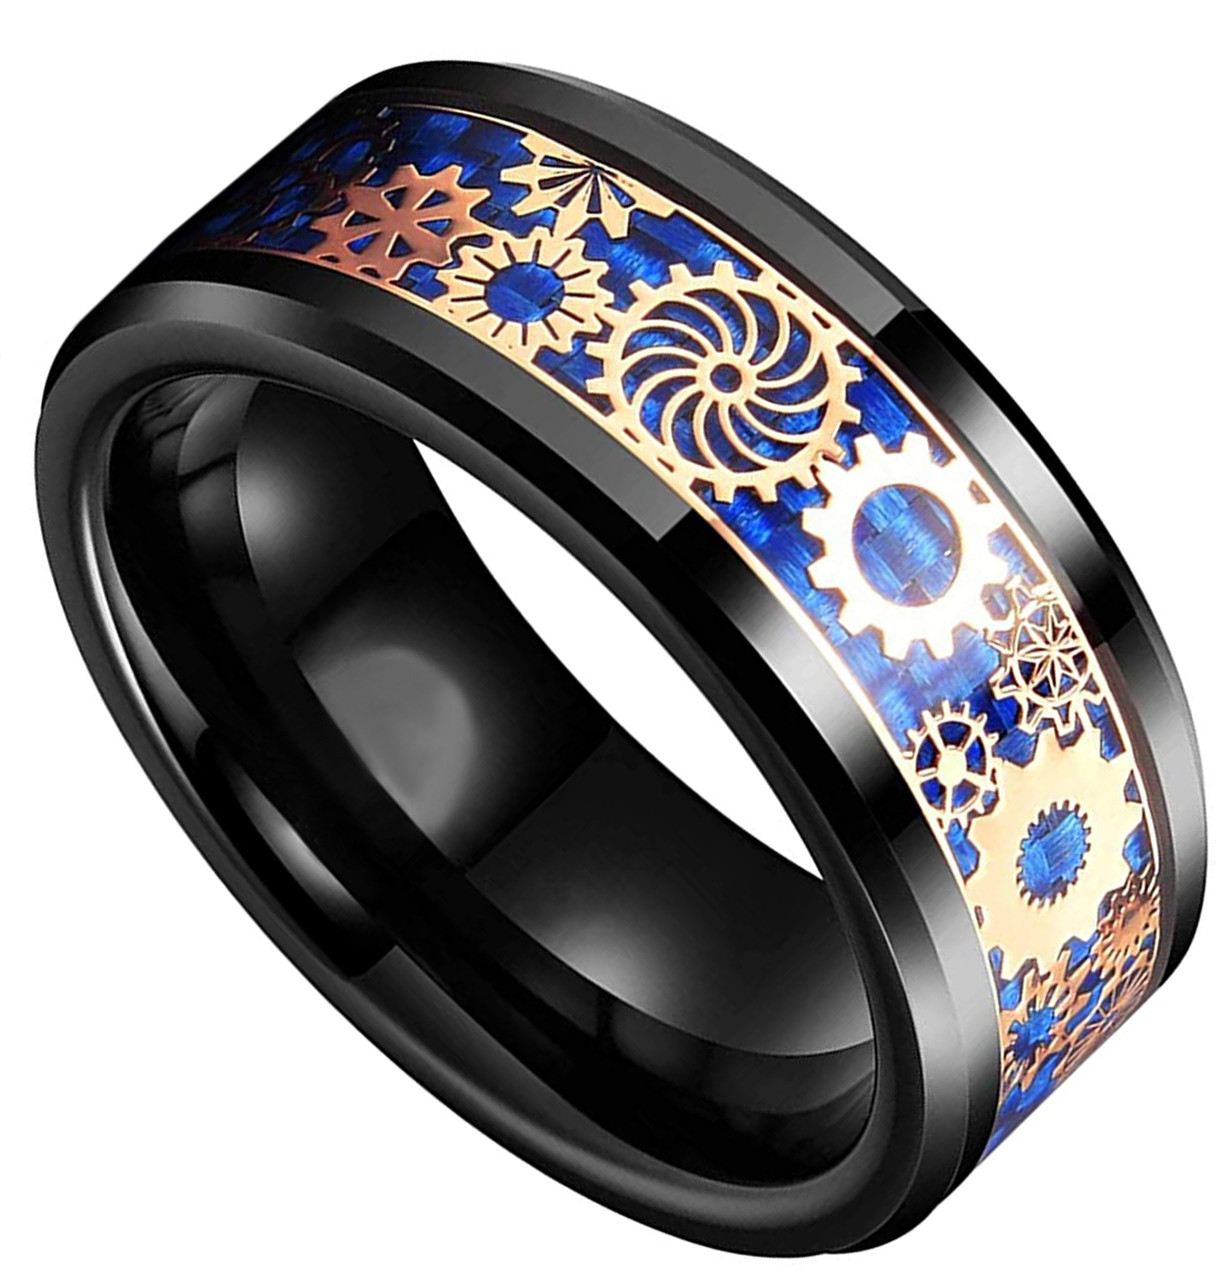 (6mm) Unisex or Women's Tungsten Carbide Wedding Ring Band. Black with Rose Gold Watch Gear Resin Inlay Design Over Blue Carbon Fiber.